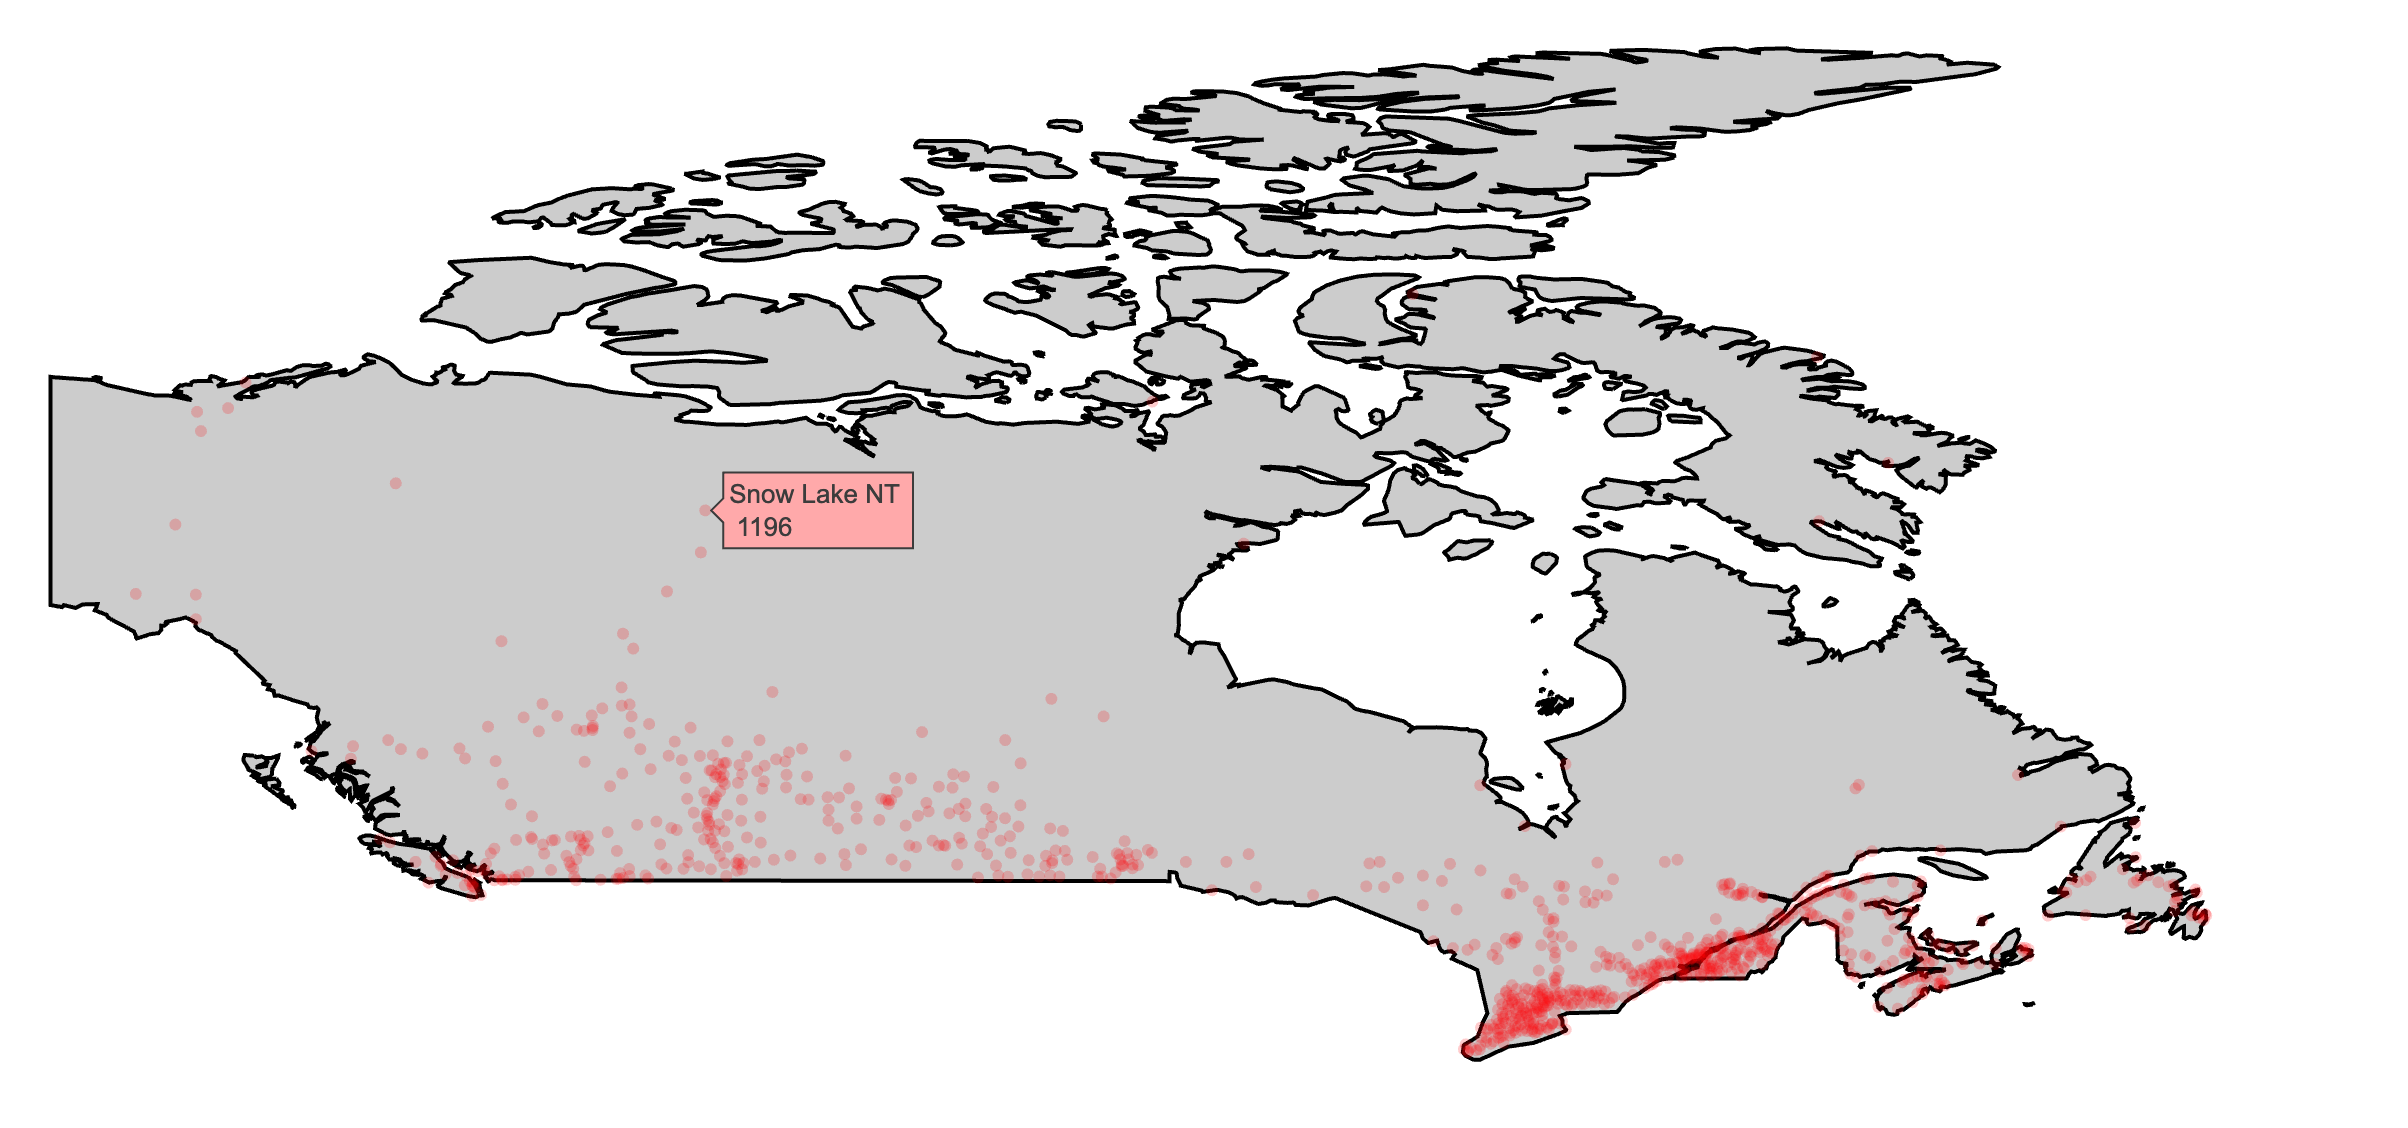 Using add_polygons() to make a map of Canada and major Canadian cities via data provided by the maps package (Richard A. Becker, Ray Brownrigg. Enhancements by Thomas P Minka, and Deckmyn. 2018).